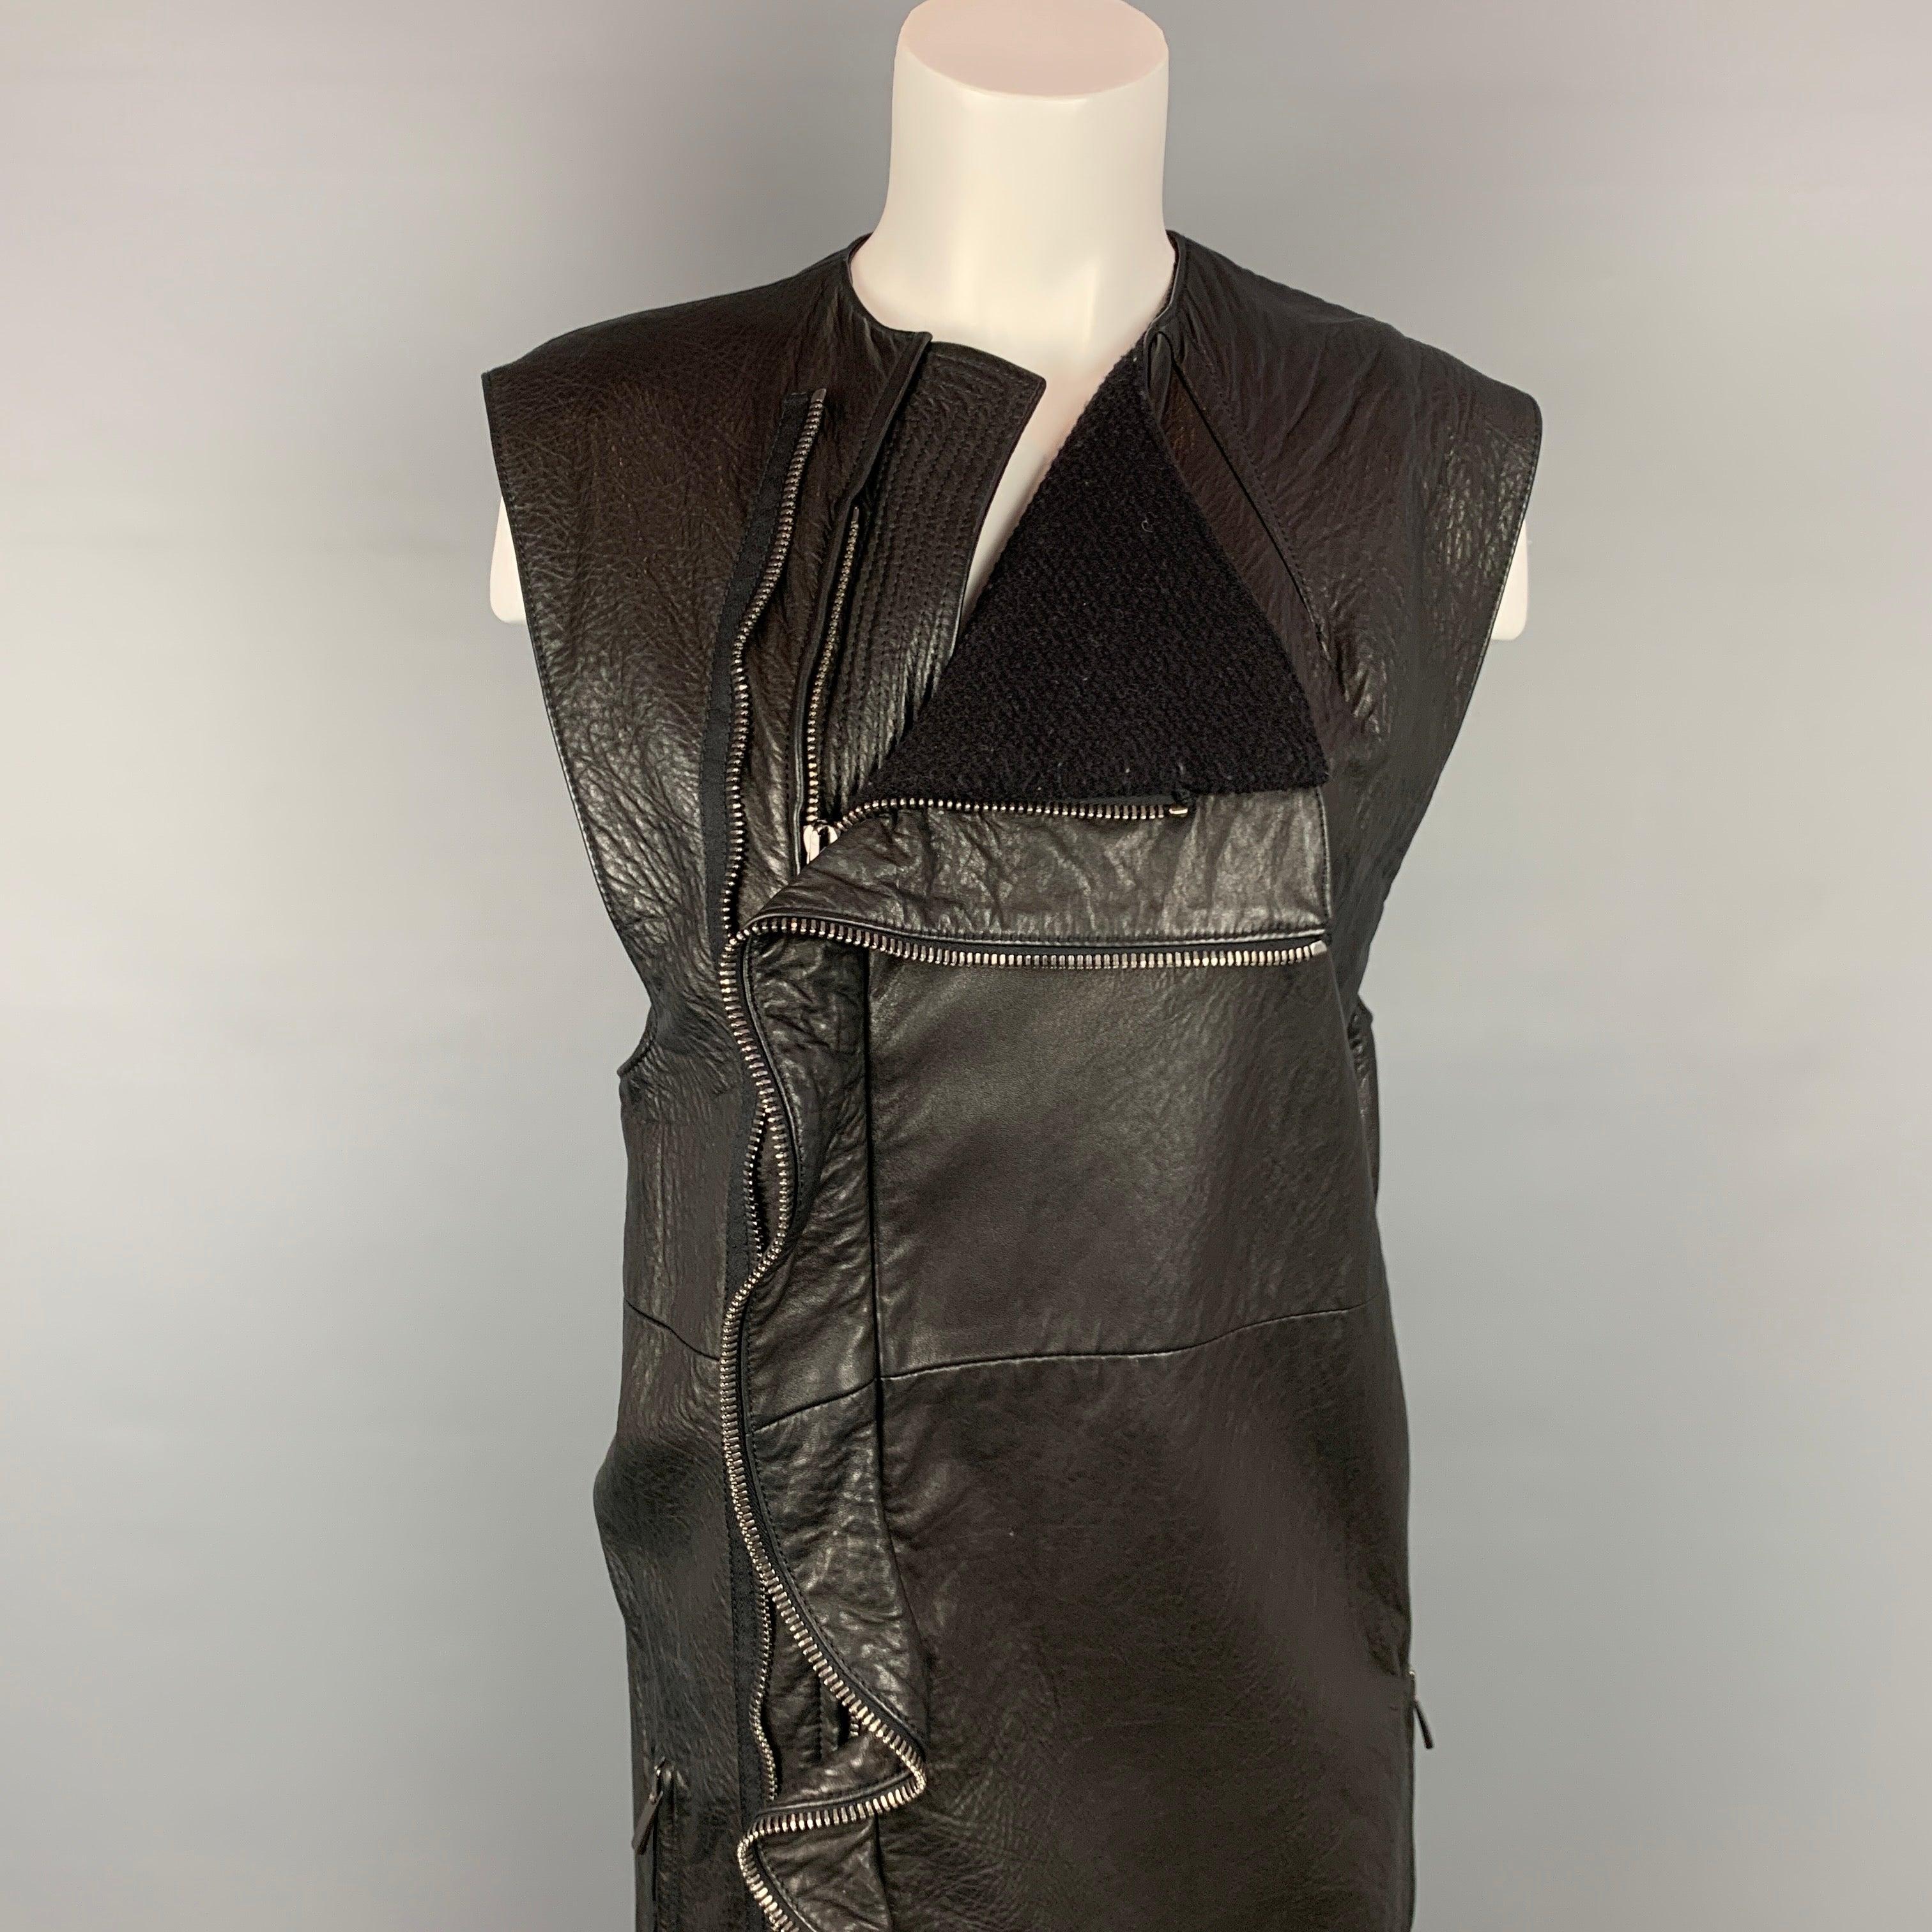 HAIDER ACKERMANN vest comes in a black leather with a full liner featuring slit pockets and a ruffled double full zip closure. Made in Italy.Very Good
Pre-Owned Condition. 

Marked:   38 

Measurements: 
 
Shoulder: 16.5 inches  Bust: 38 inches 